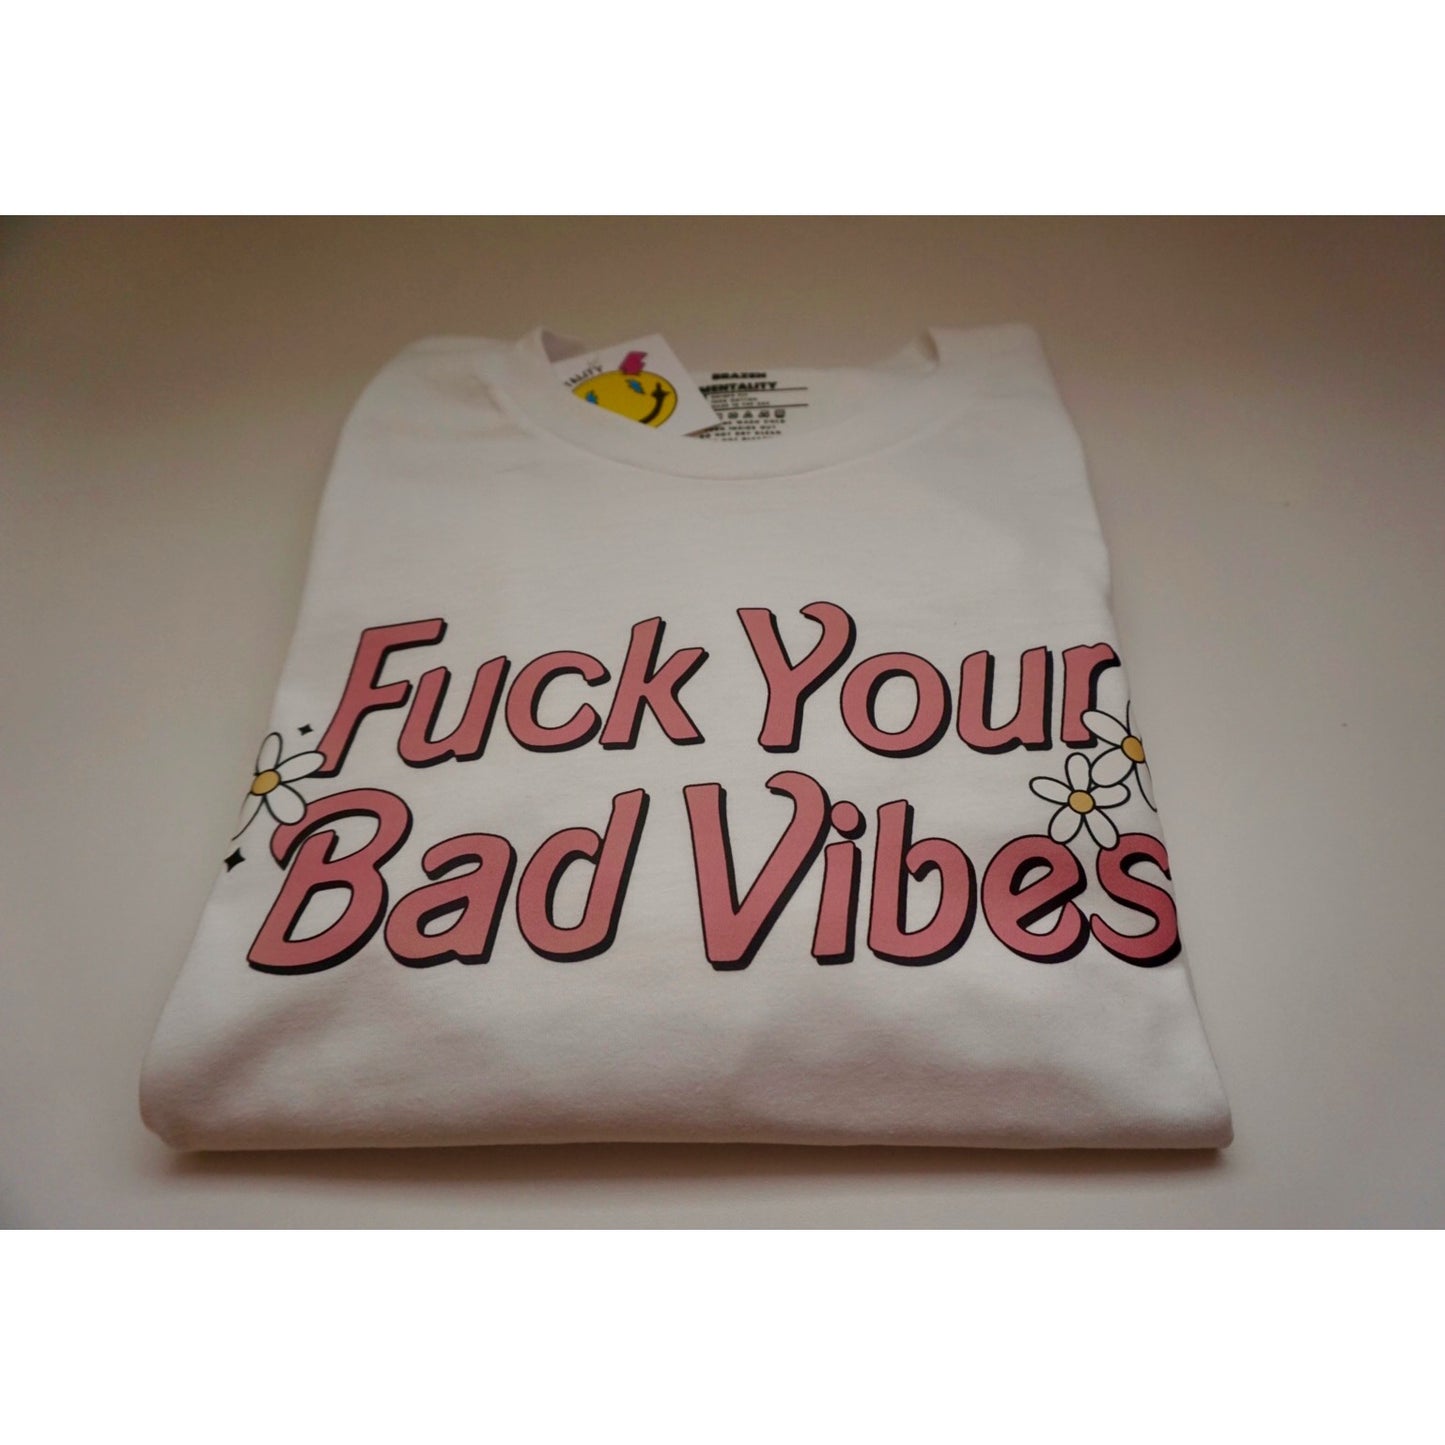 Fck your bad vibes